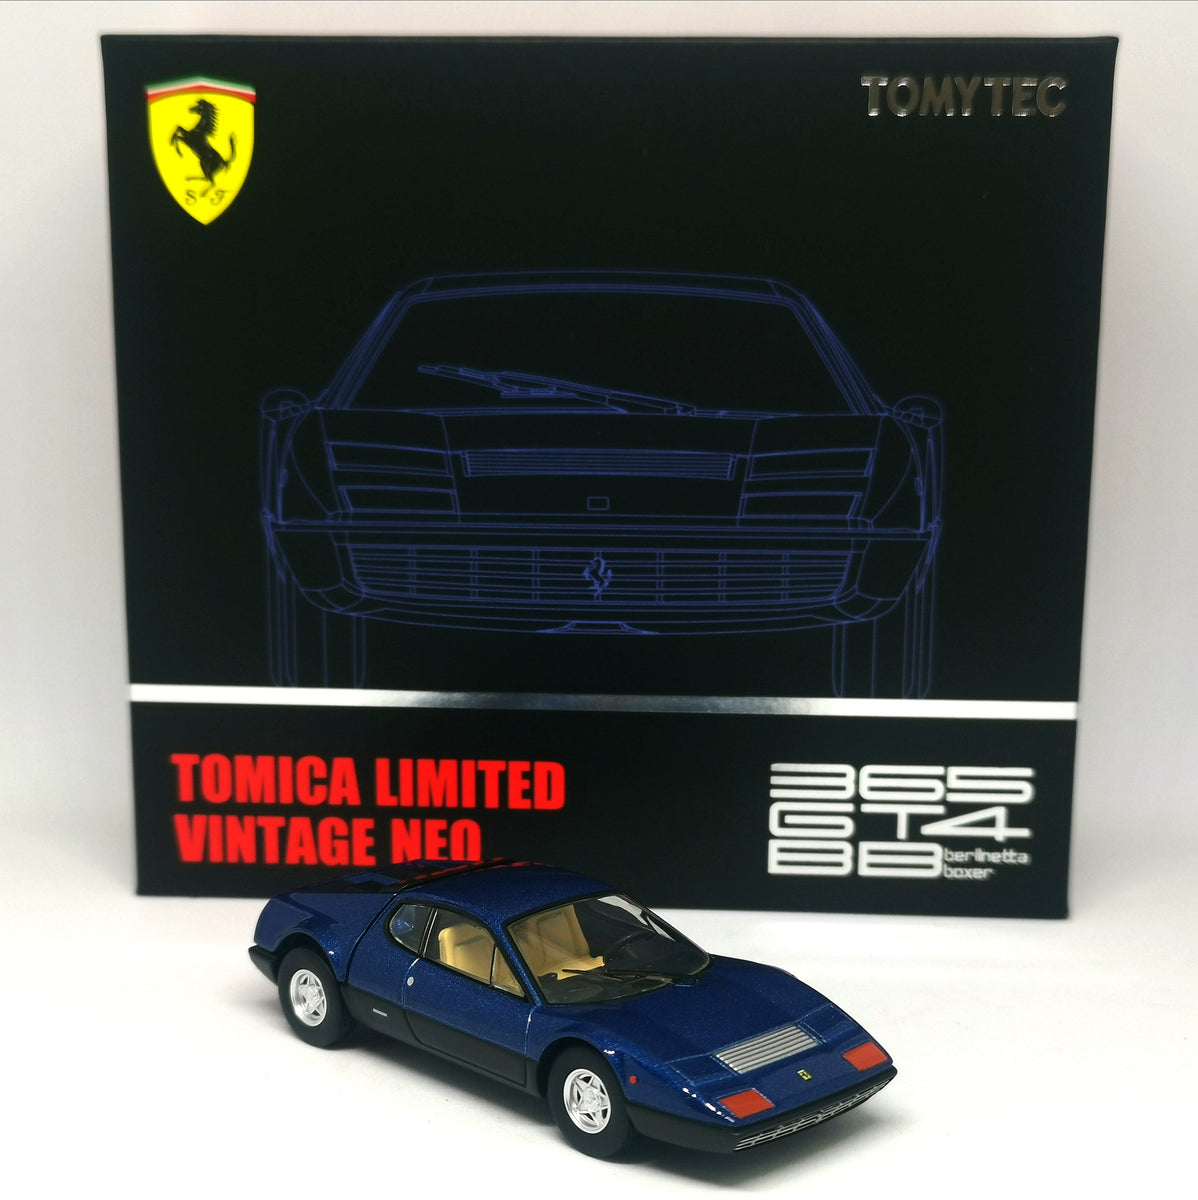 Details about   Tomica Limited Vintage Neo Ferrari 365 GT4 BB yellow New